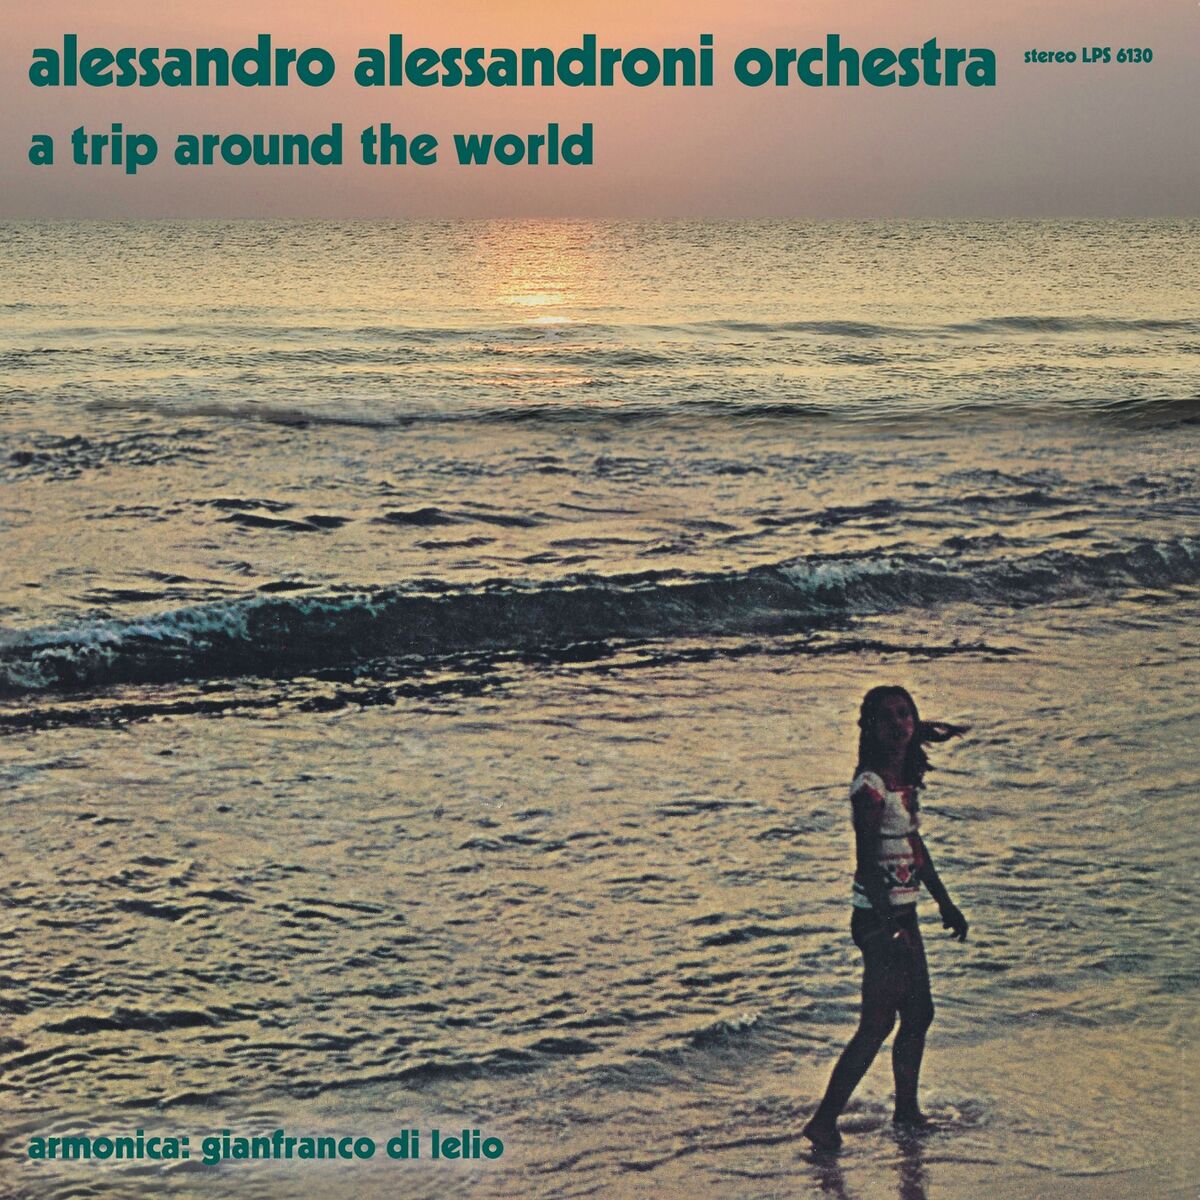 Alessandro Alessandroni: albums, songs, playlists | Listen on Deezer